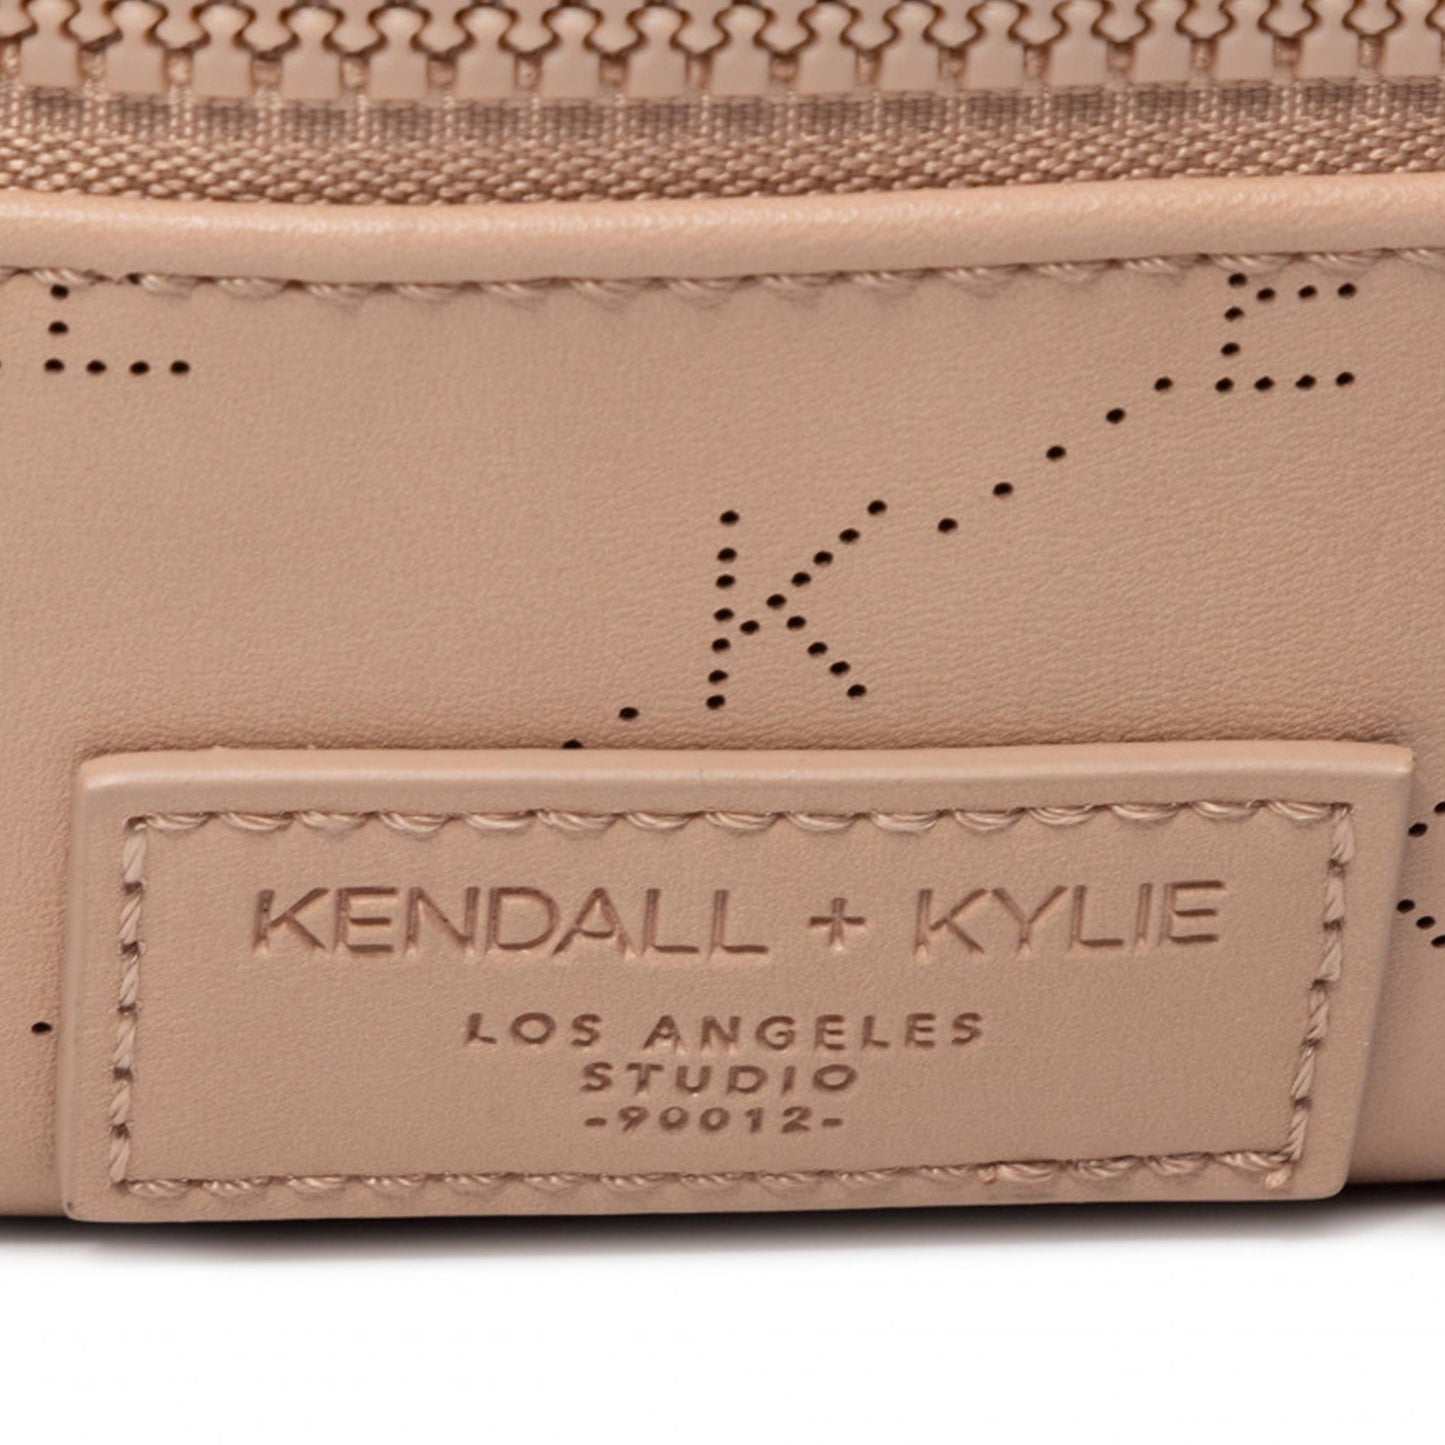 Kendall+Kylie MICHELLE Waist Pouch Bag (2 color) - YOUAREMYPOISON